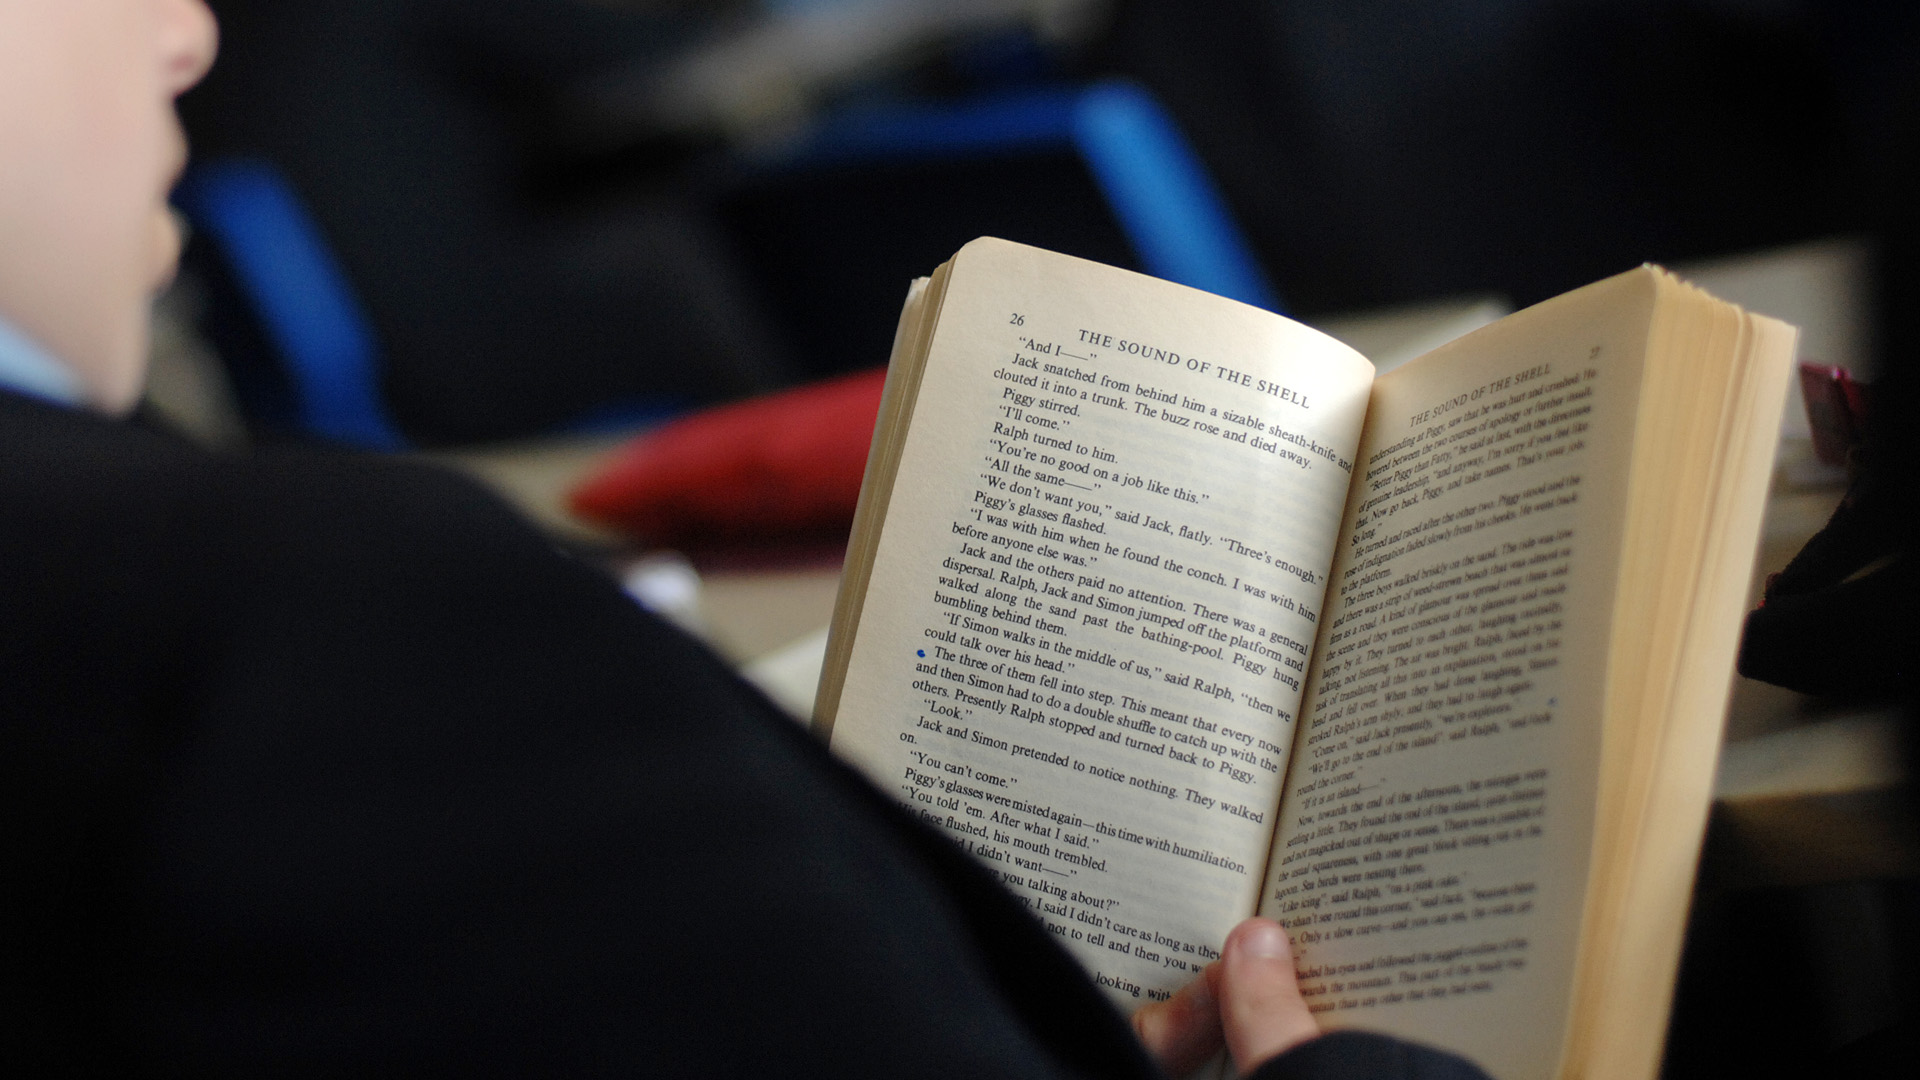 An open book being read by a person who is out of focus